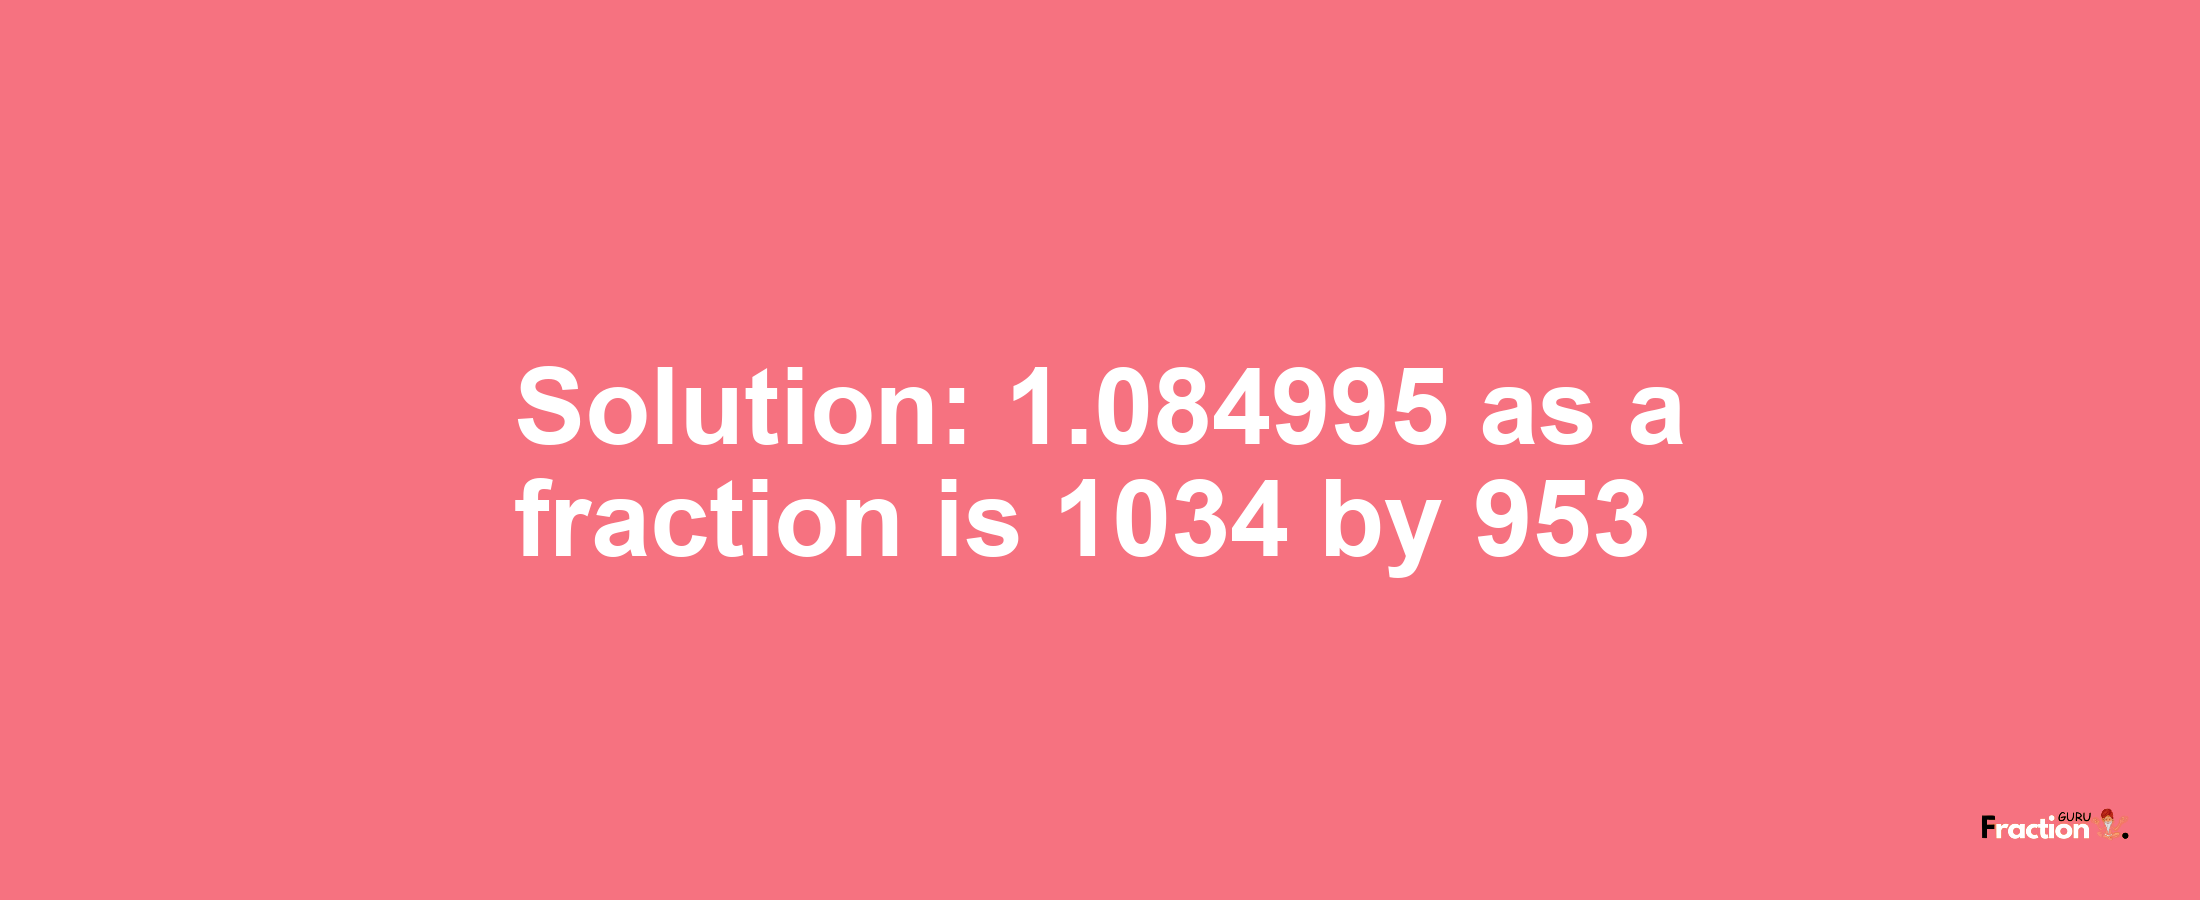 Solution:1.084995 as a fraction is 1034/953